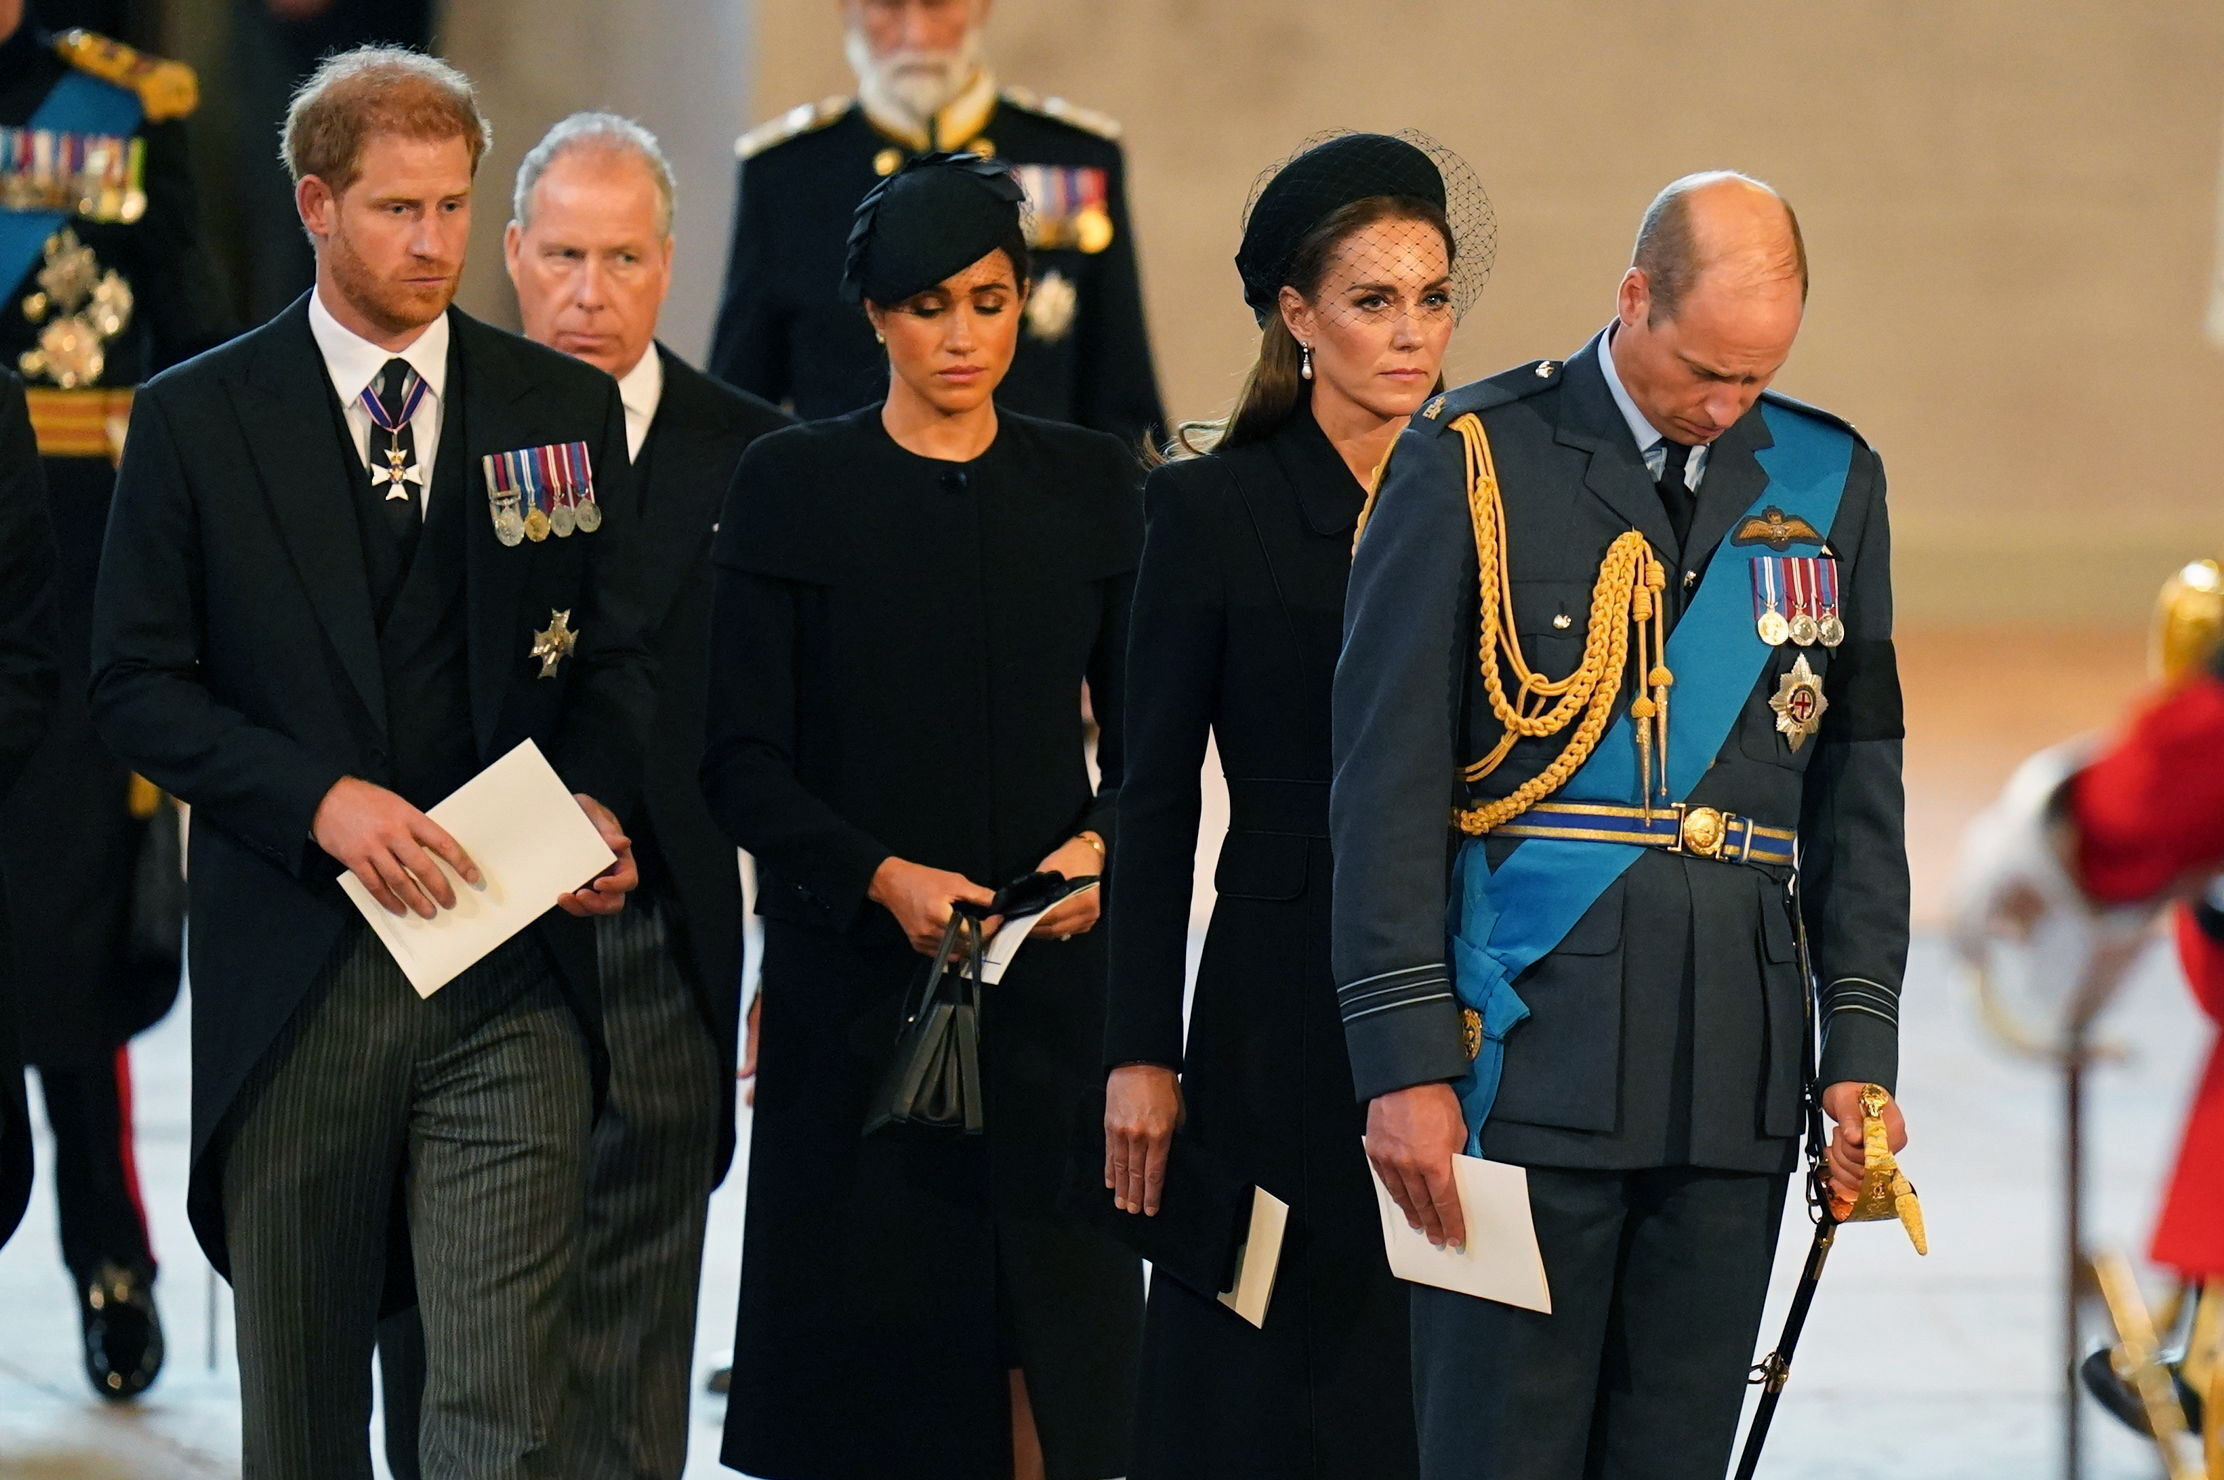 PHOTO: Prince Harry, the Earl of Snowdon, Meghan, the Duchess of Sussex, Kate, Princess of Wales and Prince William follow the bearer party carrying the coffin of Queen Elizabeth II into Westminster Hall, London, Sept. 14, 2022.